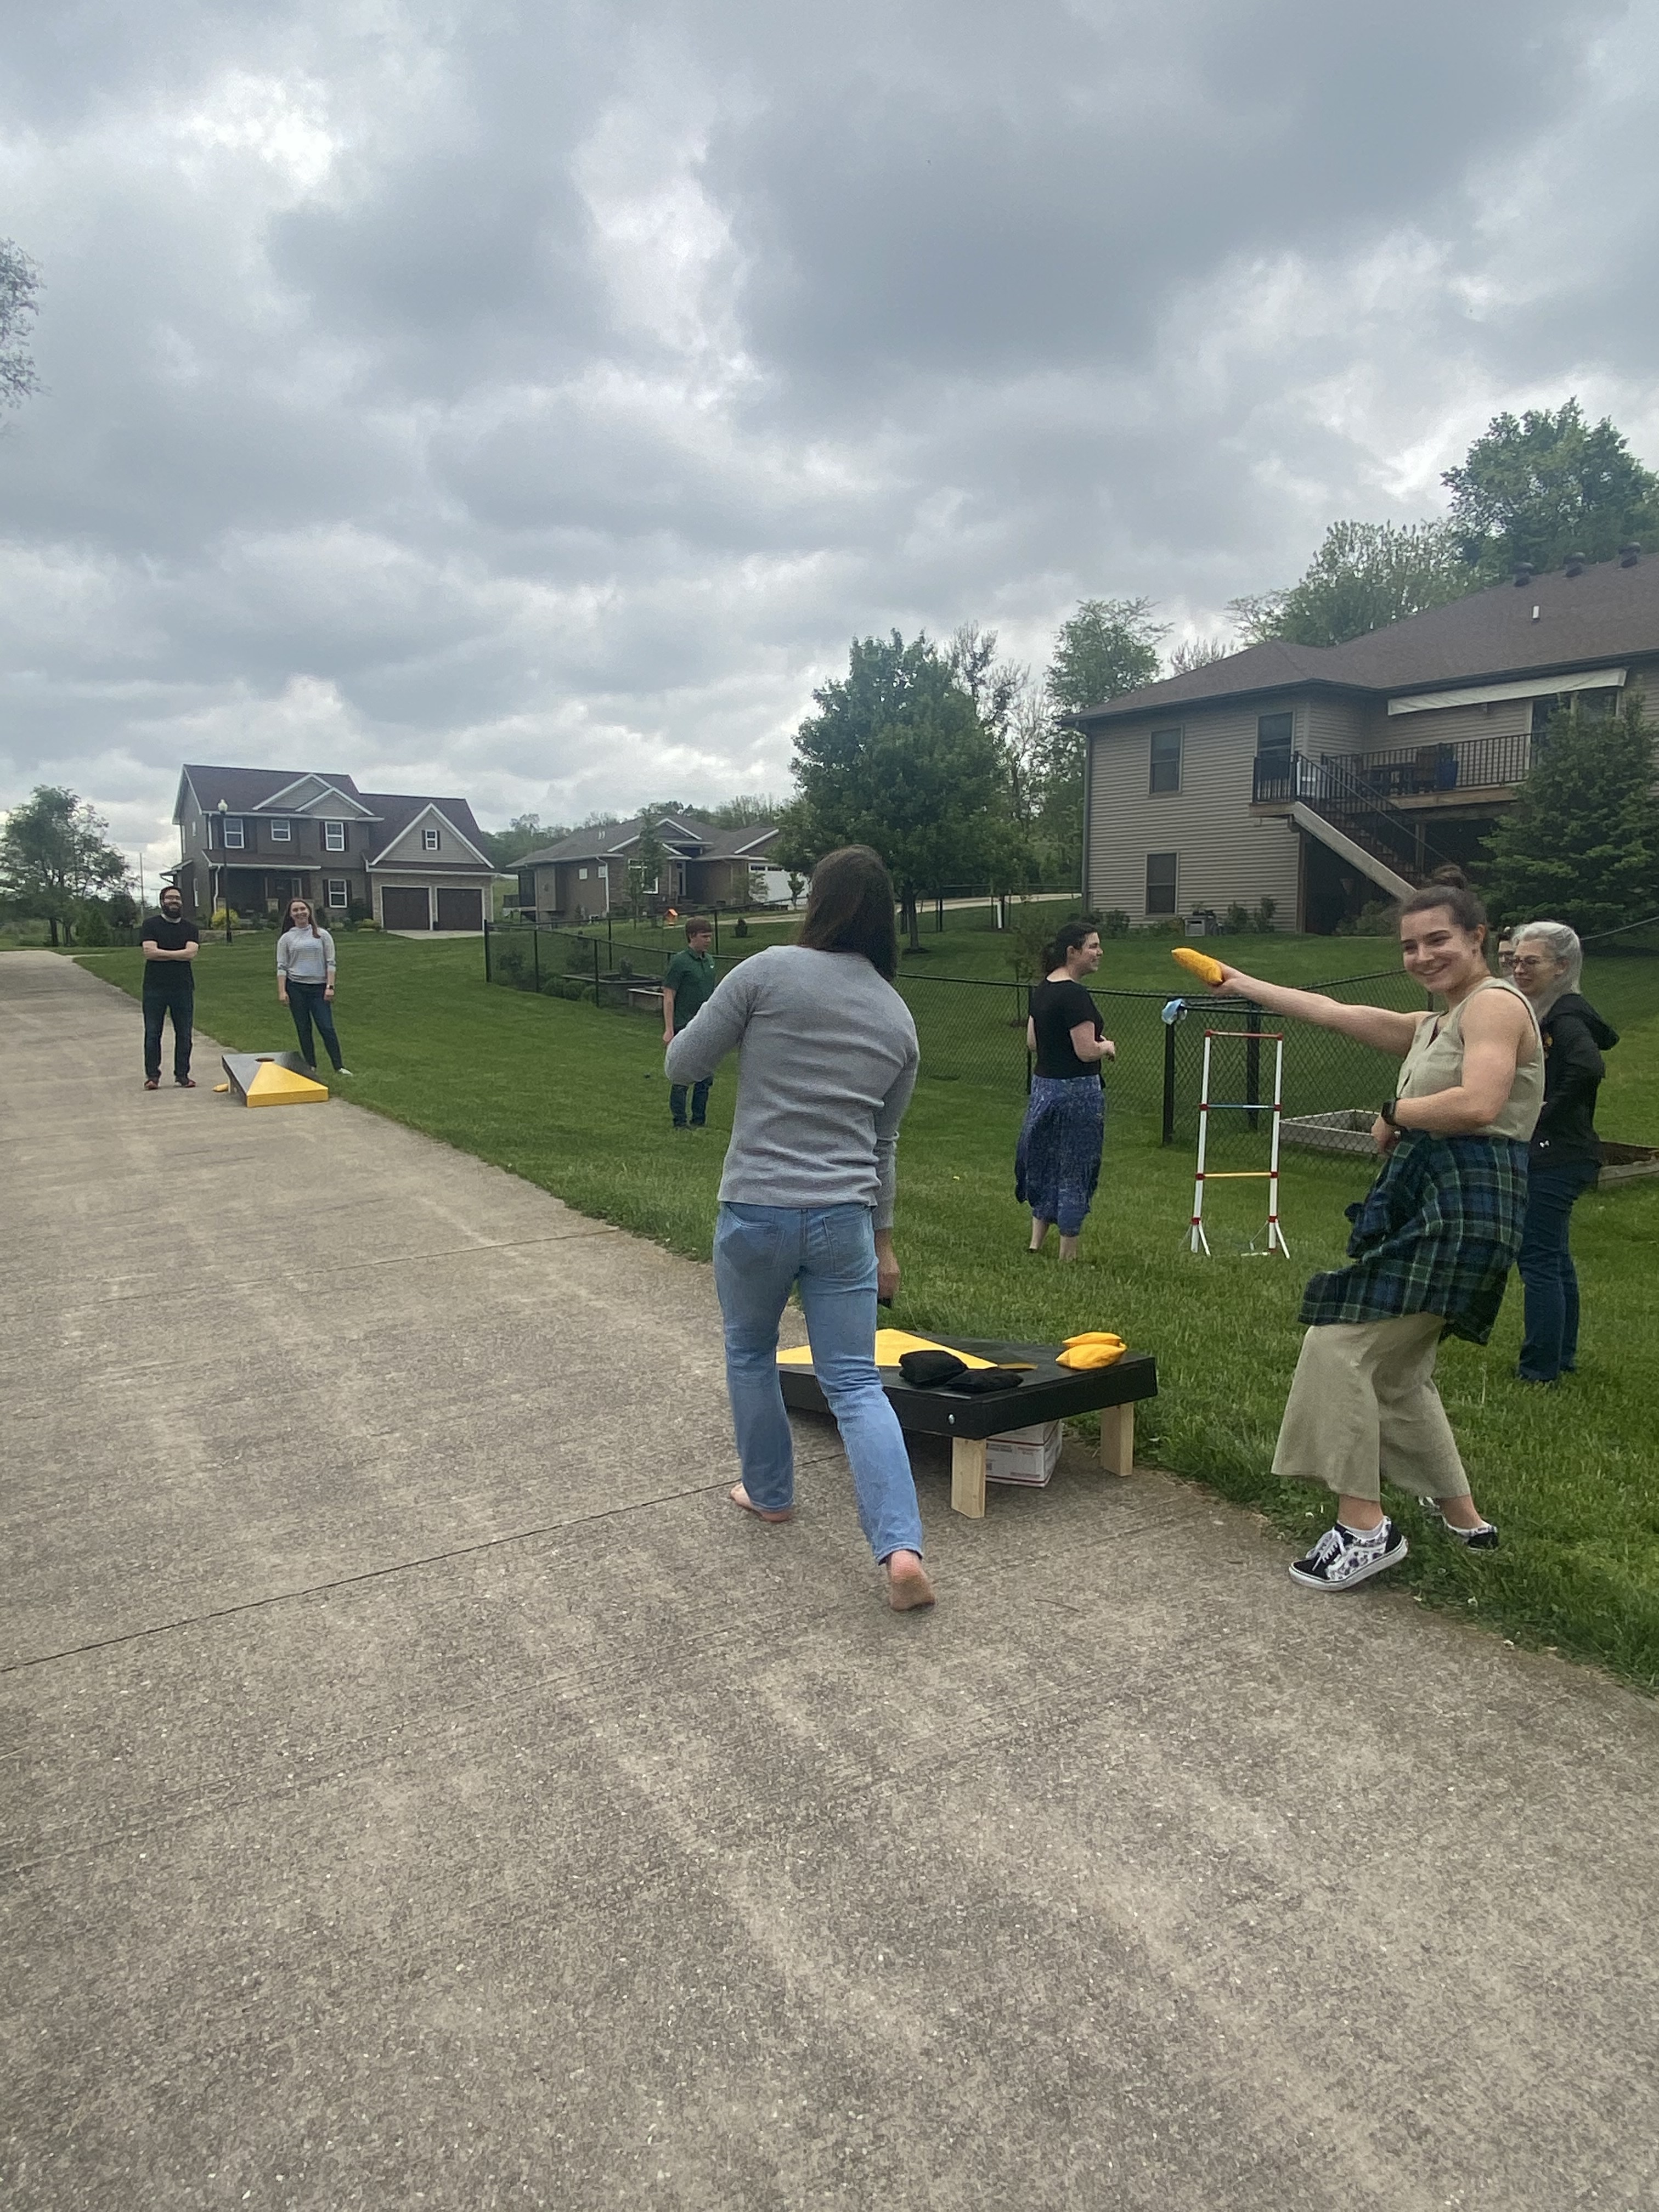 Leslie showing off her corn hole skills as she smiles at the camera. You can see other Cole group members playing yard games in the background